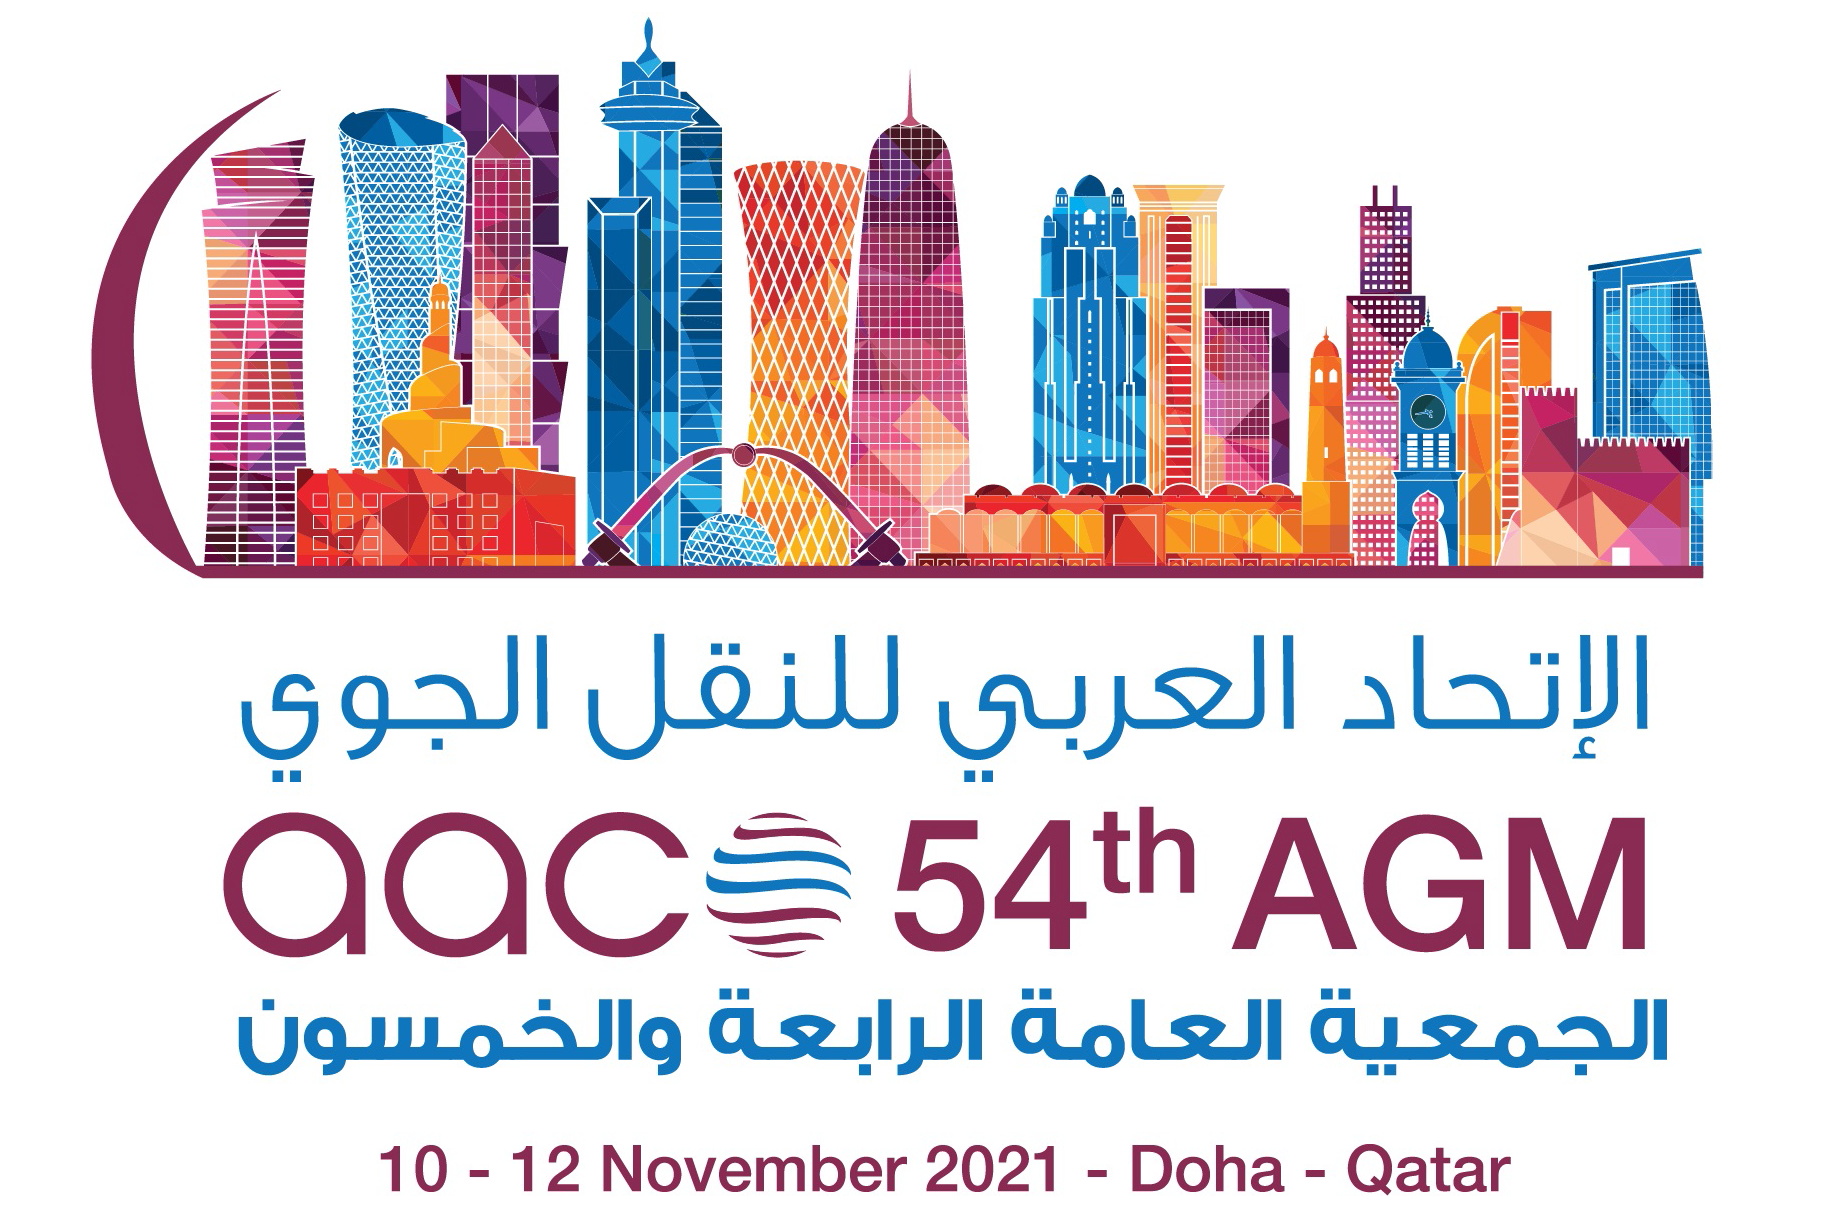 The 54th AGM of the Arab Air Carriers’ Organization (AACO) is currently taking place in Doha, Qatar Click to enlarge.